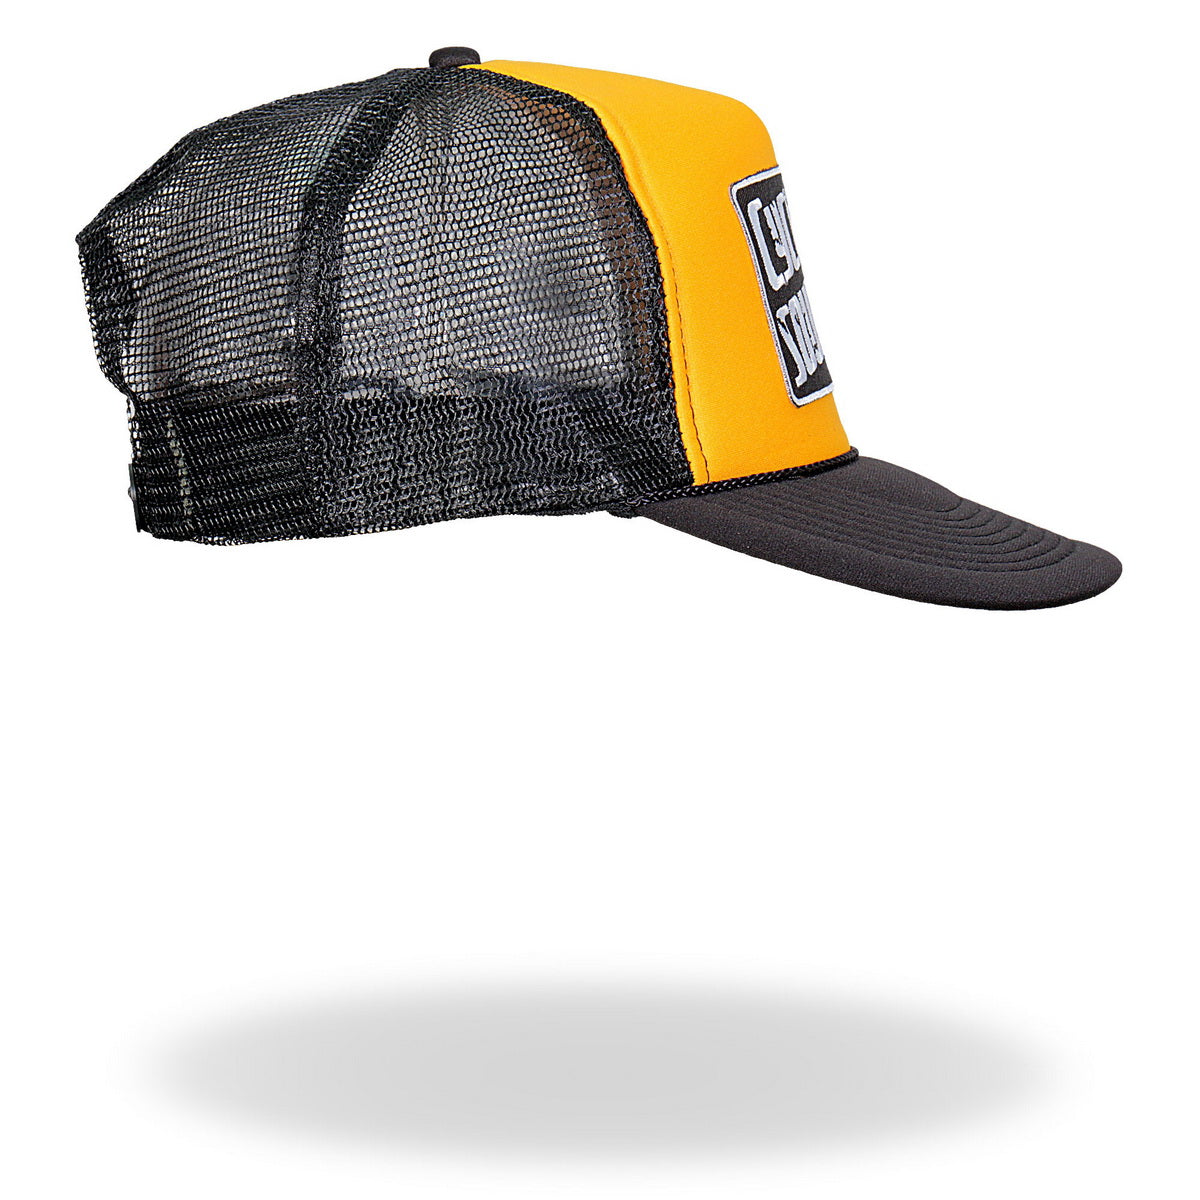 Hot Leathers CYA1005 Official Cycle Source Magazine Logo Gold and Black Snapback Trucker Hat